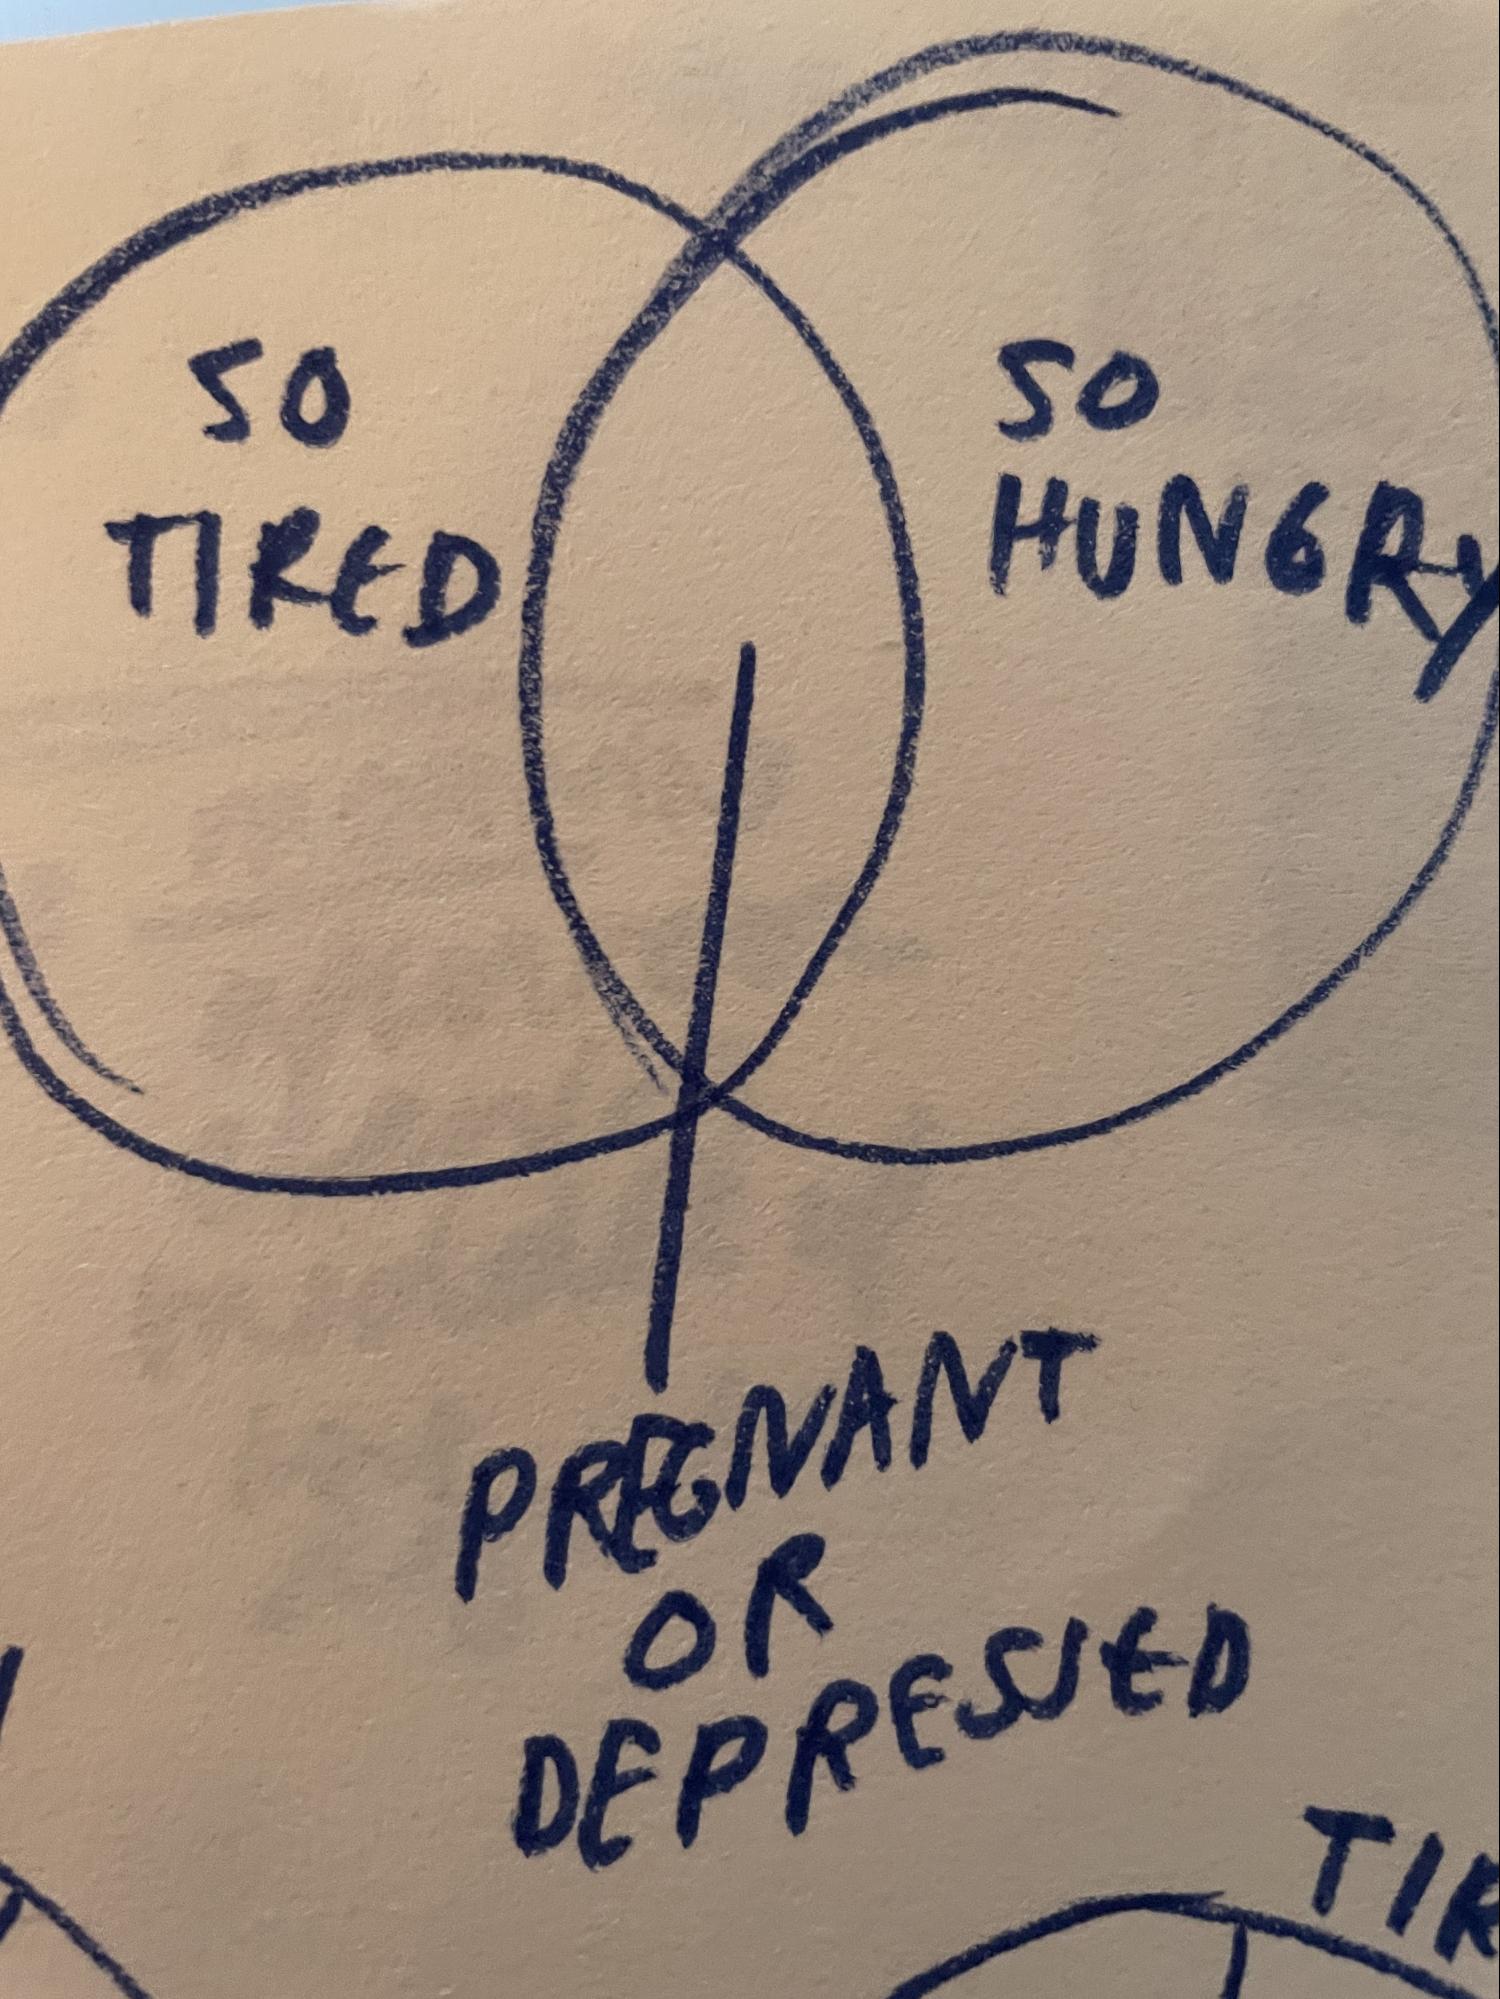 So tired + So hungry = pregnant or depressed